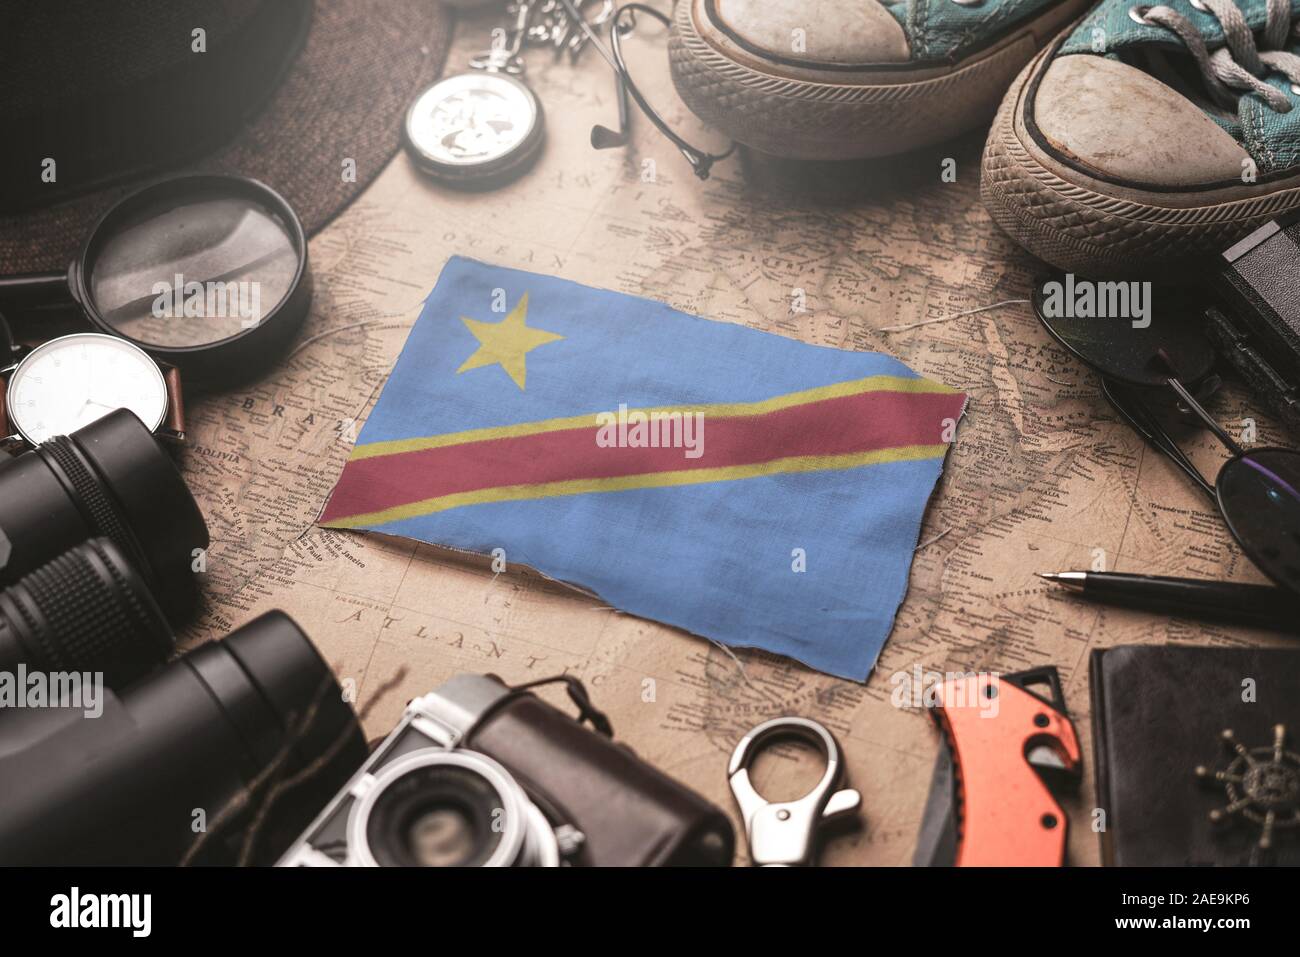 Democratic Republic of the Congo Flag Between Traveler's Accessories on Old Vintage Map. Tourist Destination Concept. Stock Photo